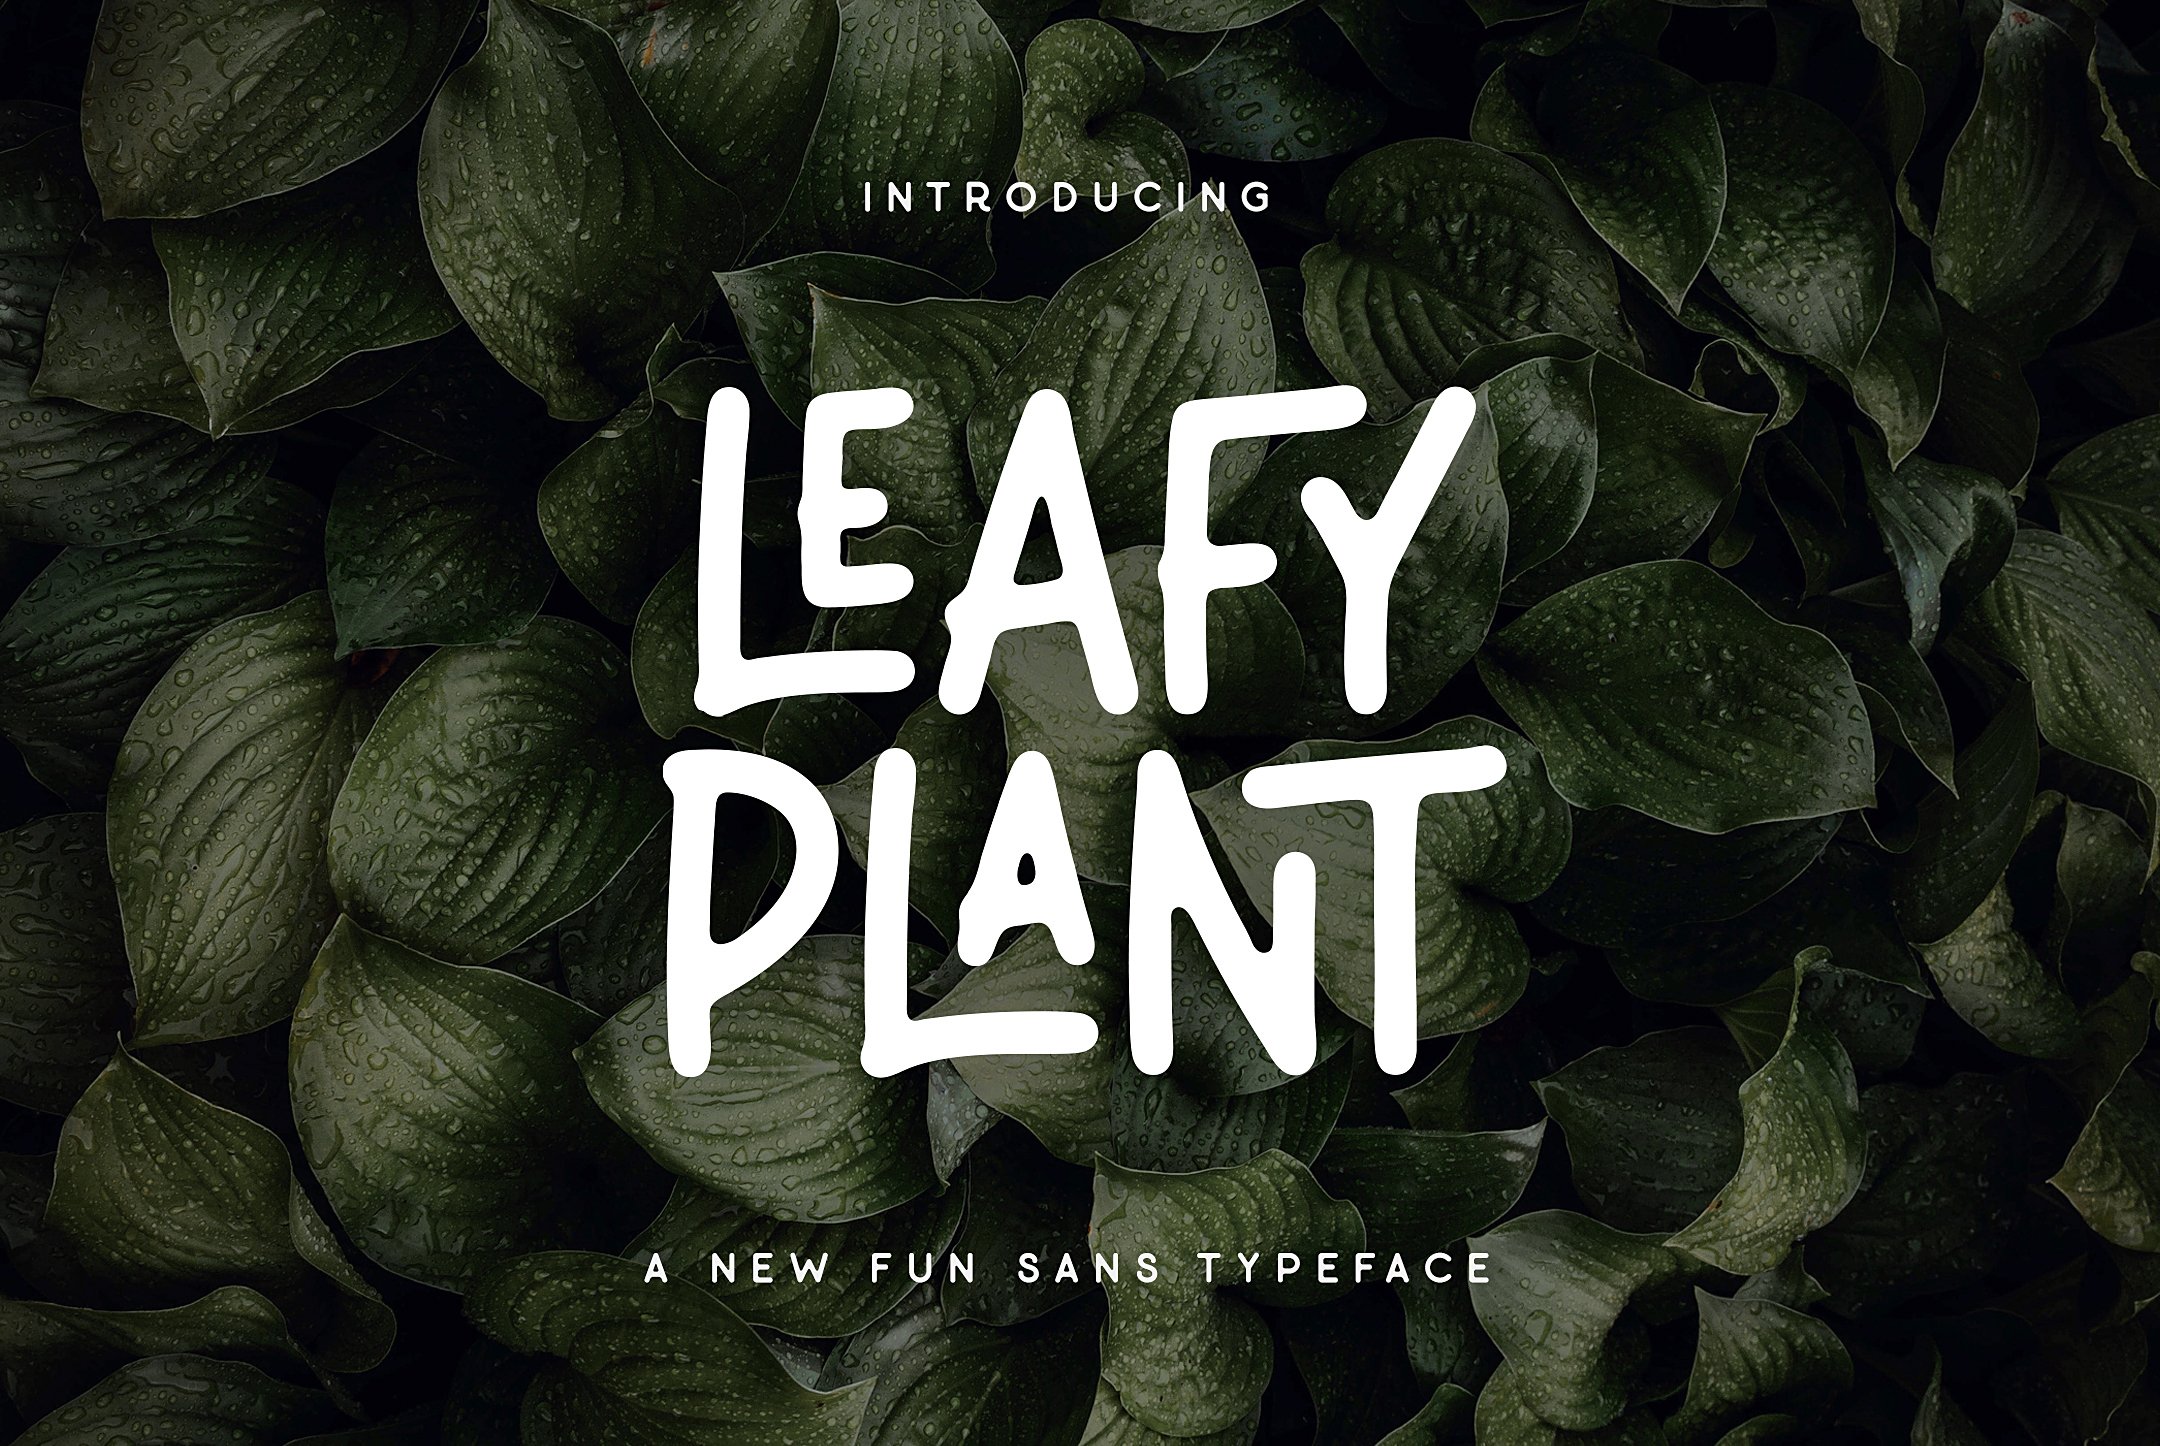 Leafy Plant Fun Typeface cover image.